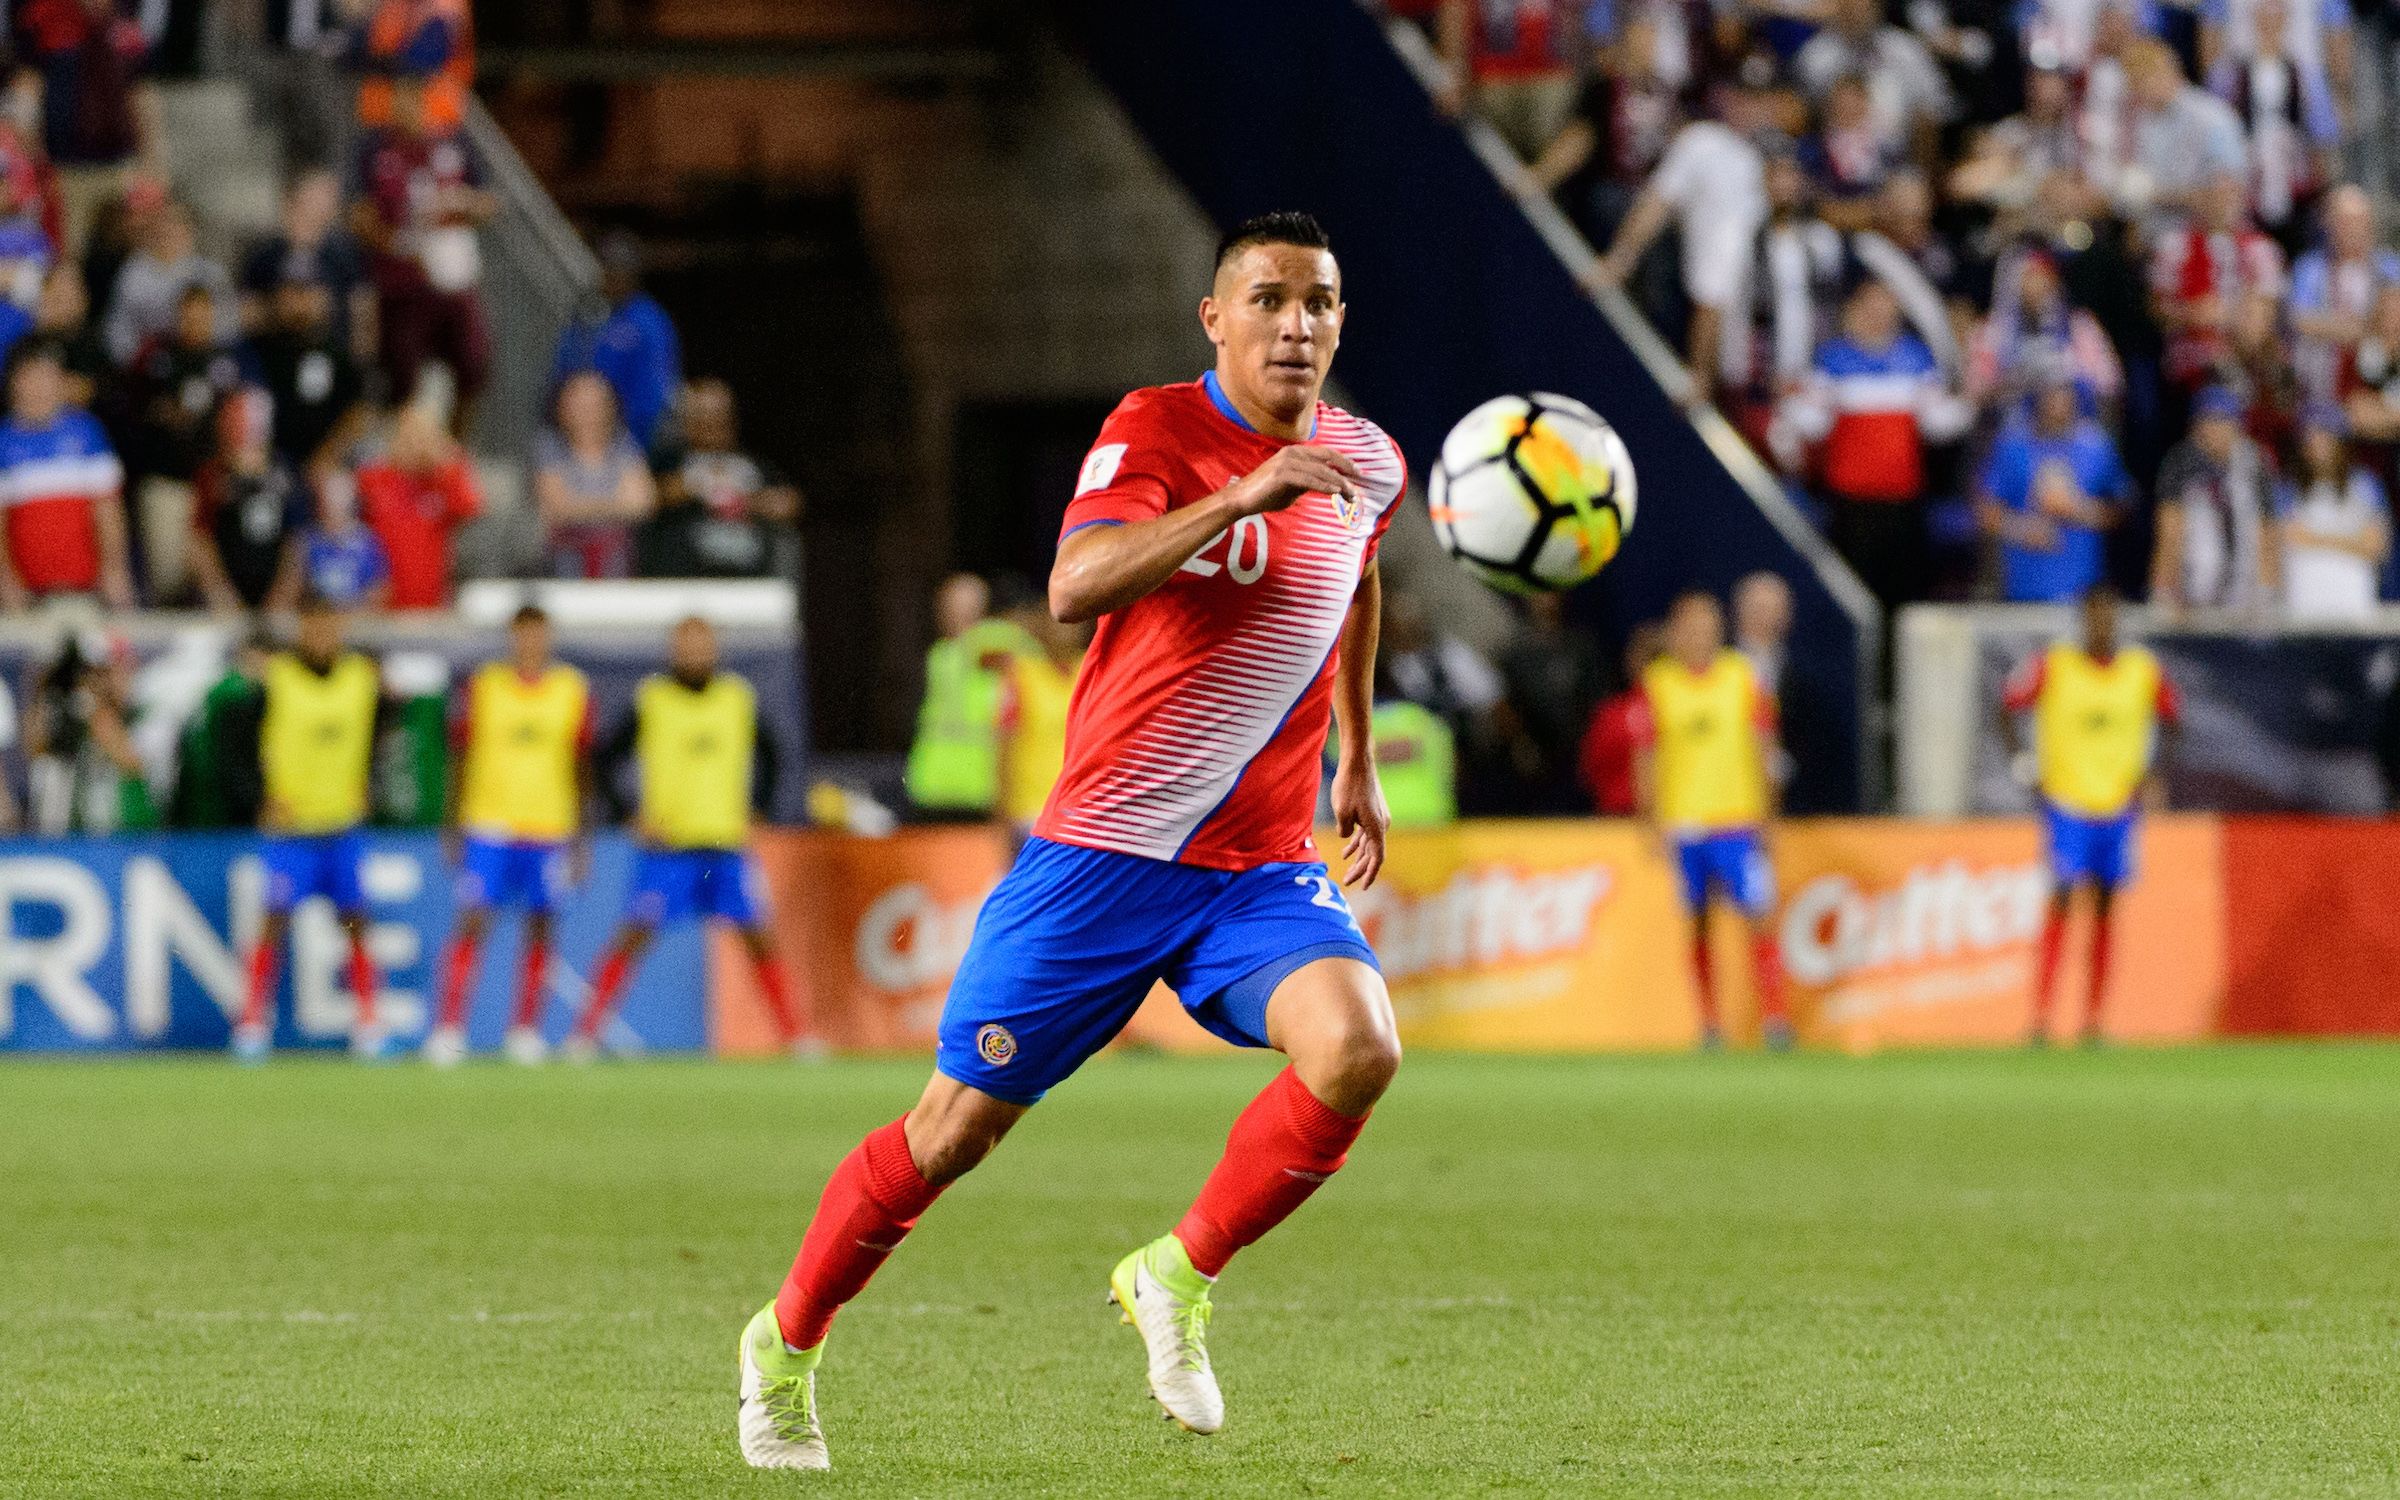 Costa Rica vs New Zealand Match Preview, Where to Watch, Odds and Lineups | June 14